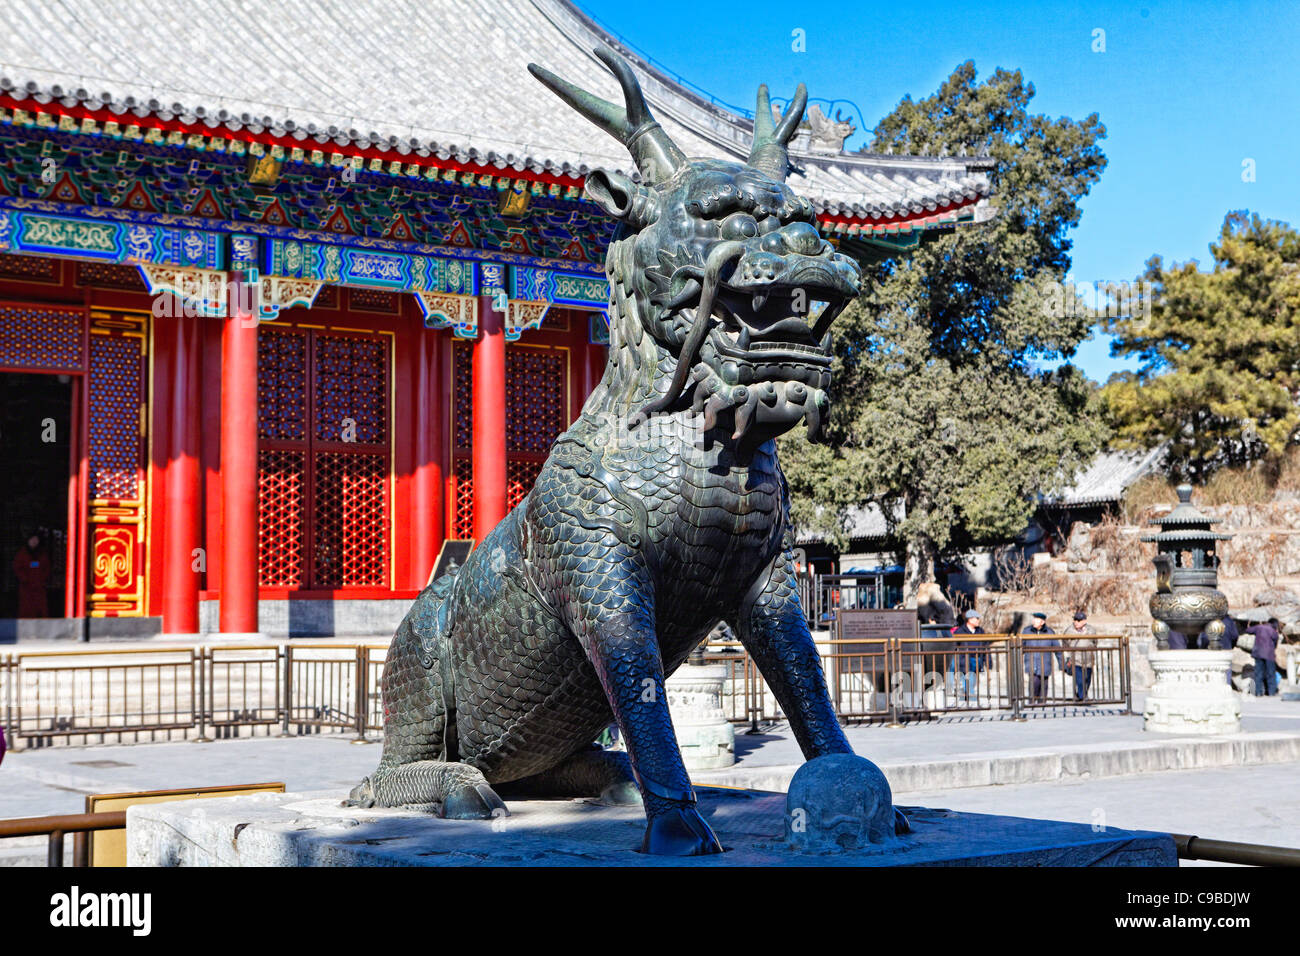 Stataue of a Qilin, Chinese Chimerical Creature, Summer Palace, Beijing China Stock Photo